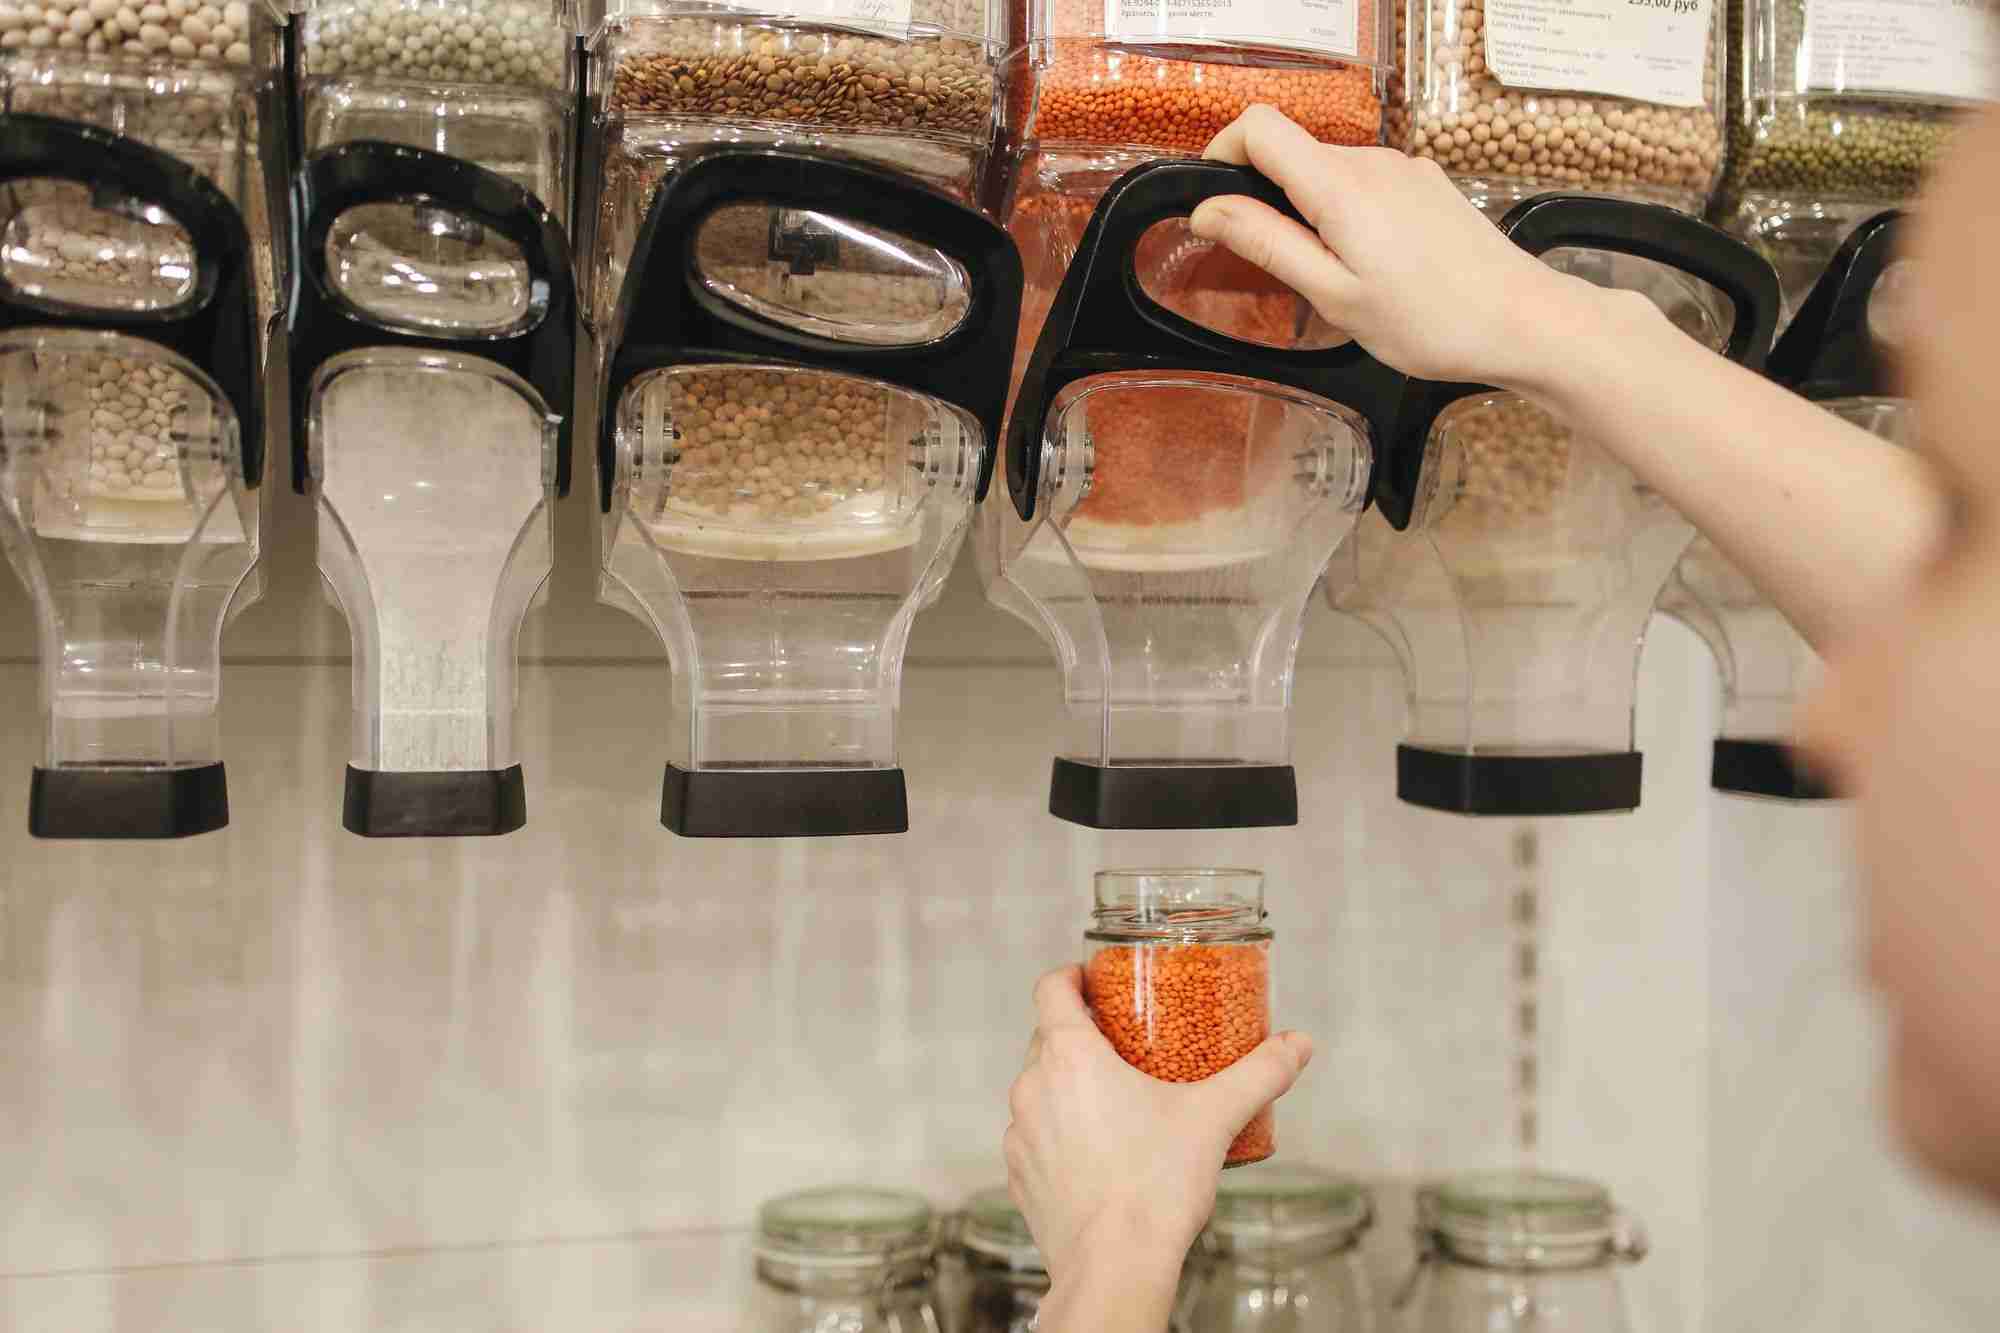 a person holding a jar of food in front of a spice rack.